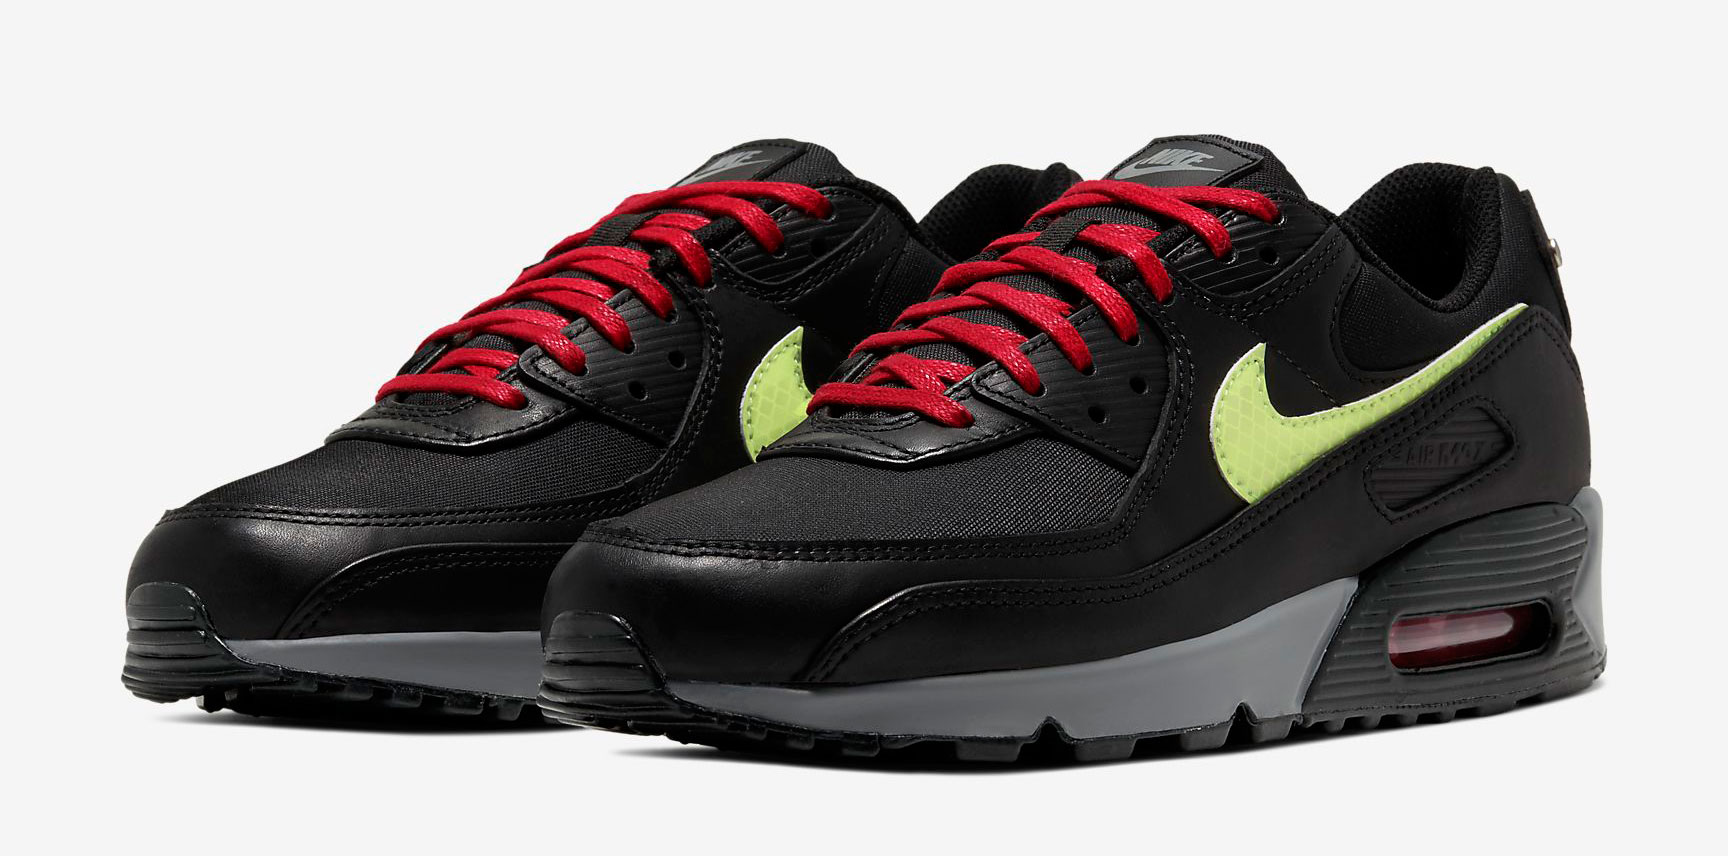 nike-air-max-90-fdny-release-date-1